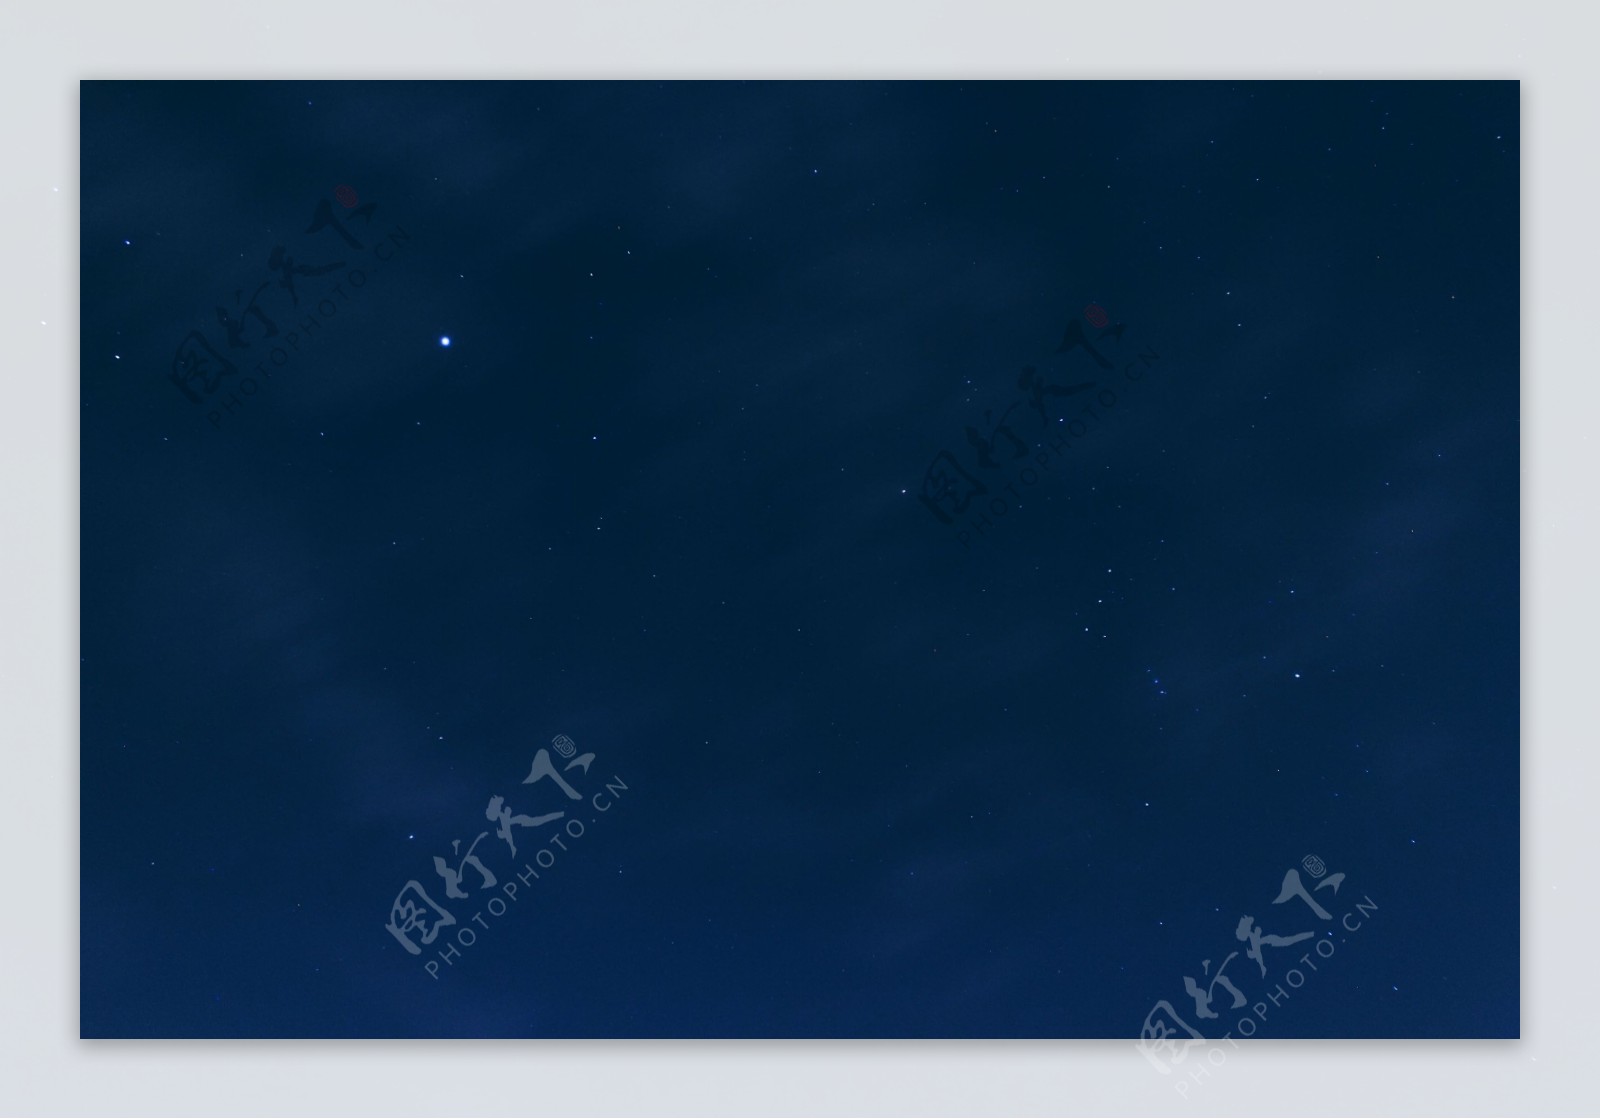 Look up to the stars of the galaxy creative image_picture free download ...